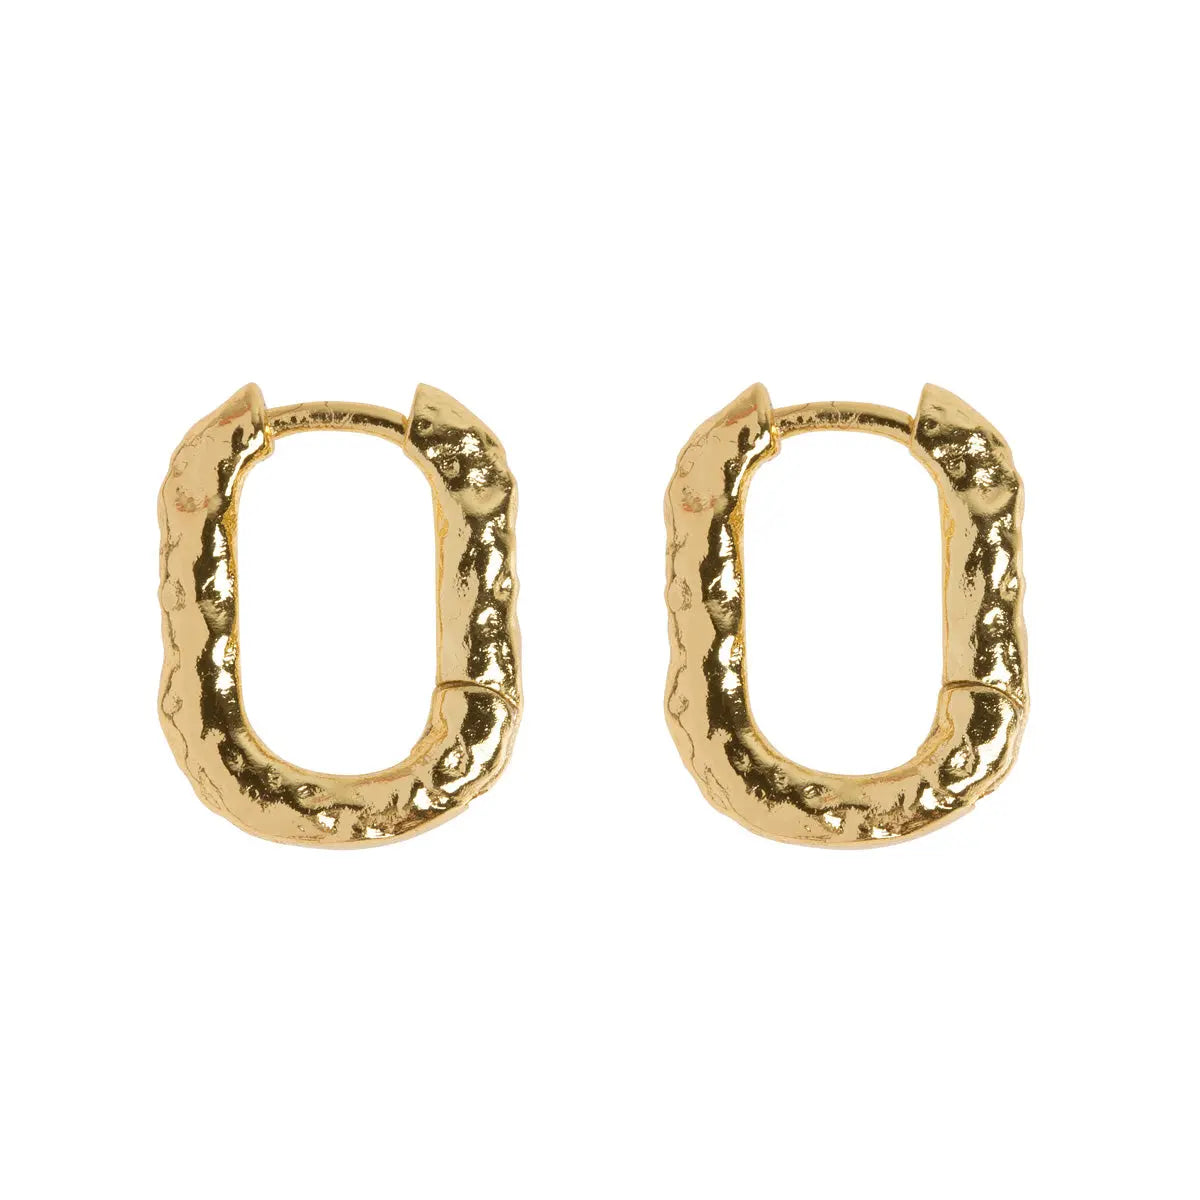 Small Hammered Square Hoop Earrings